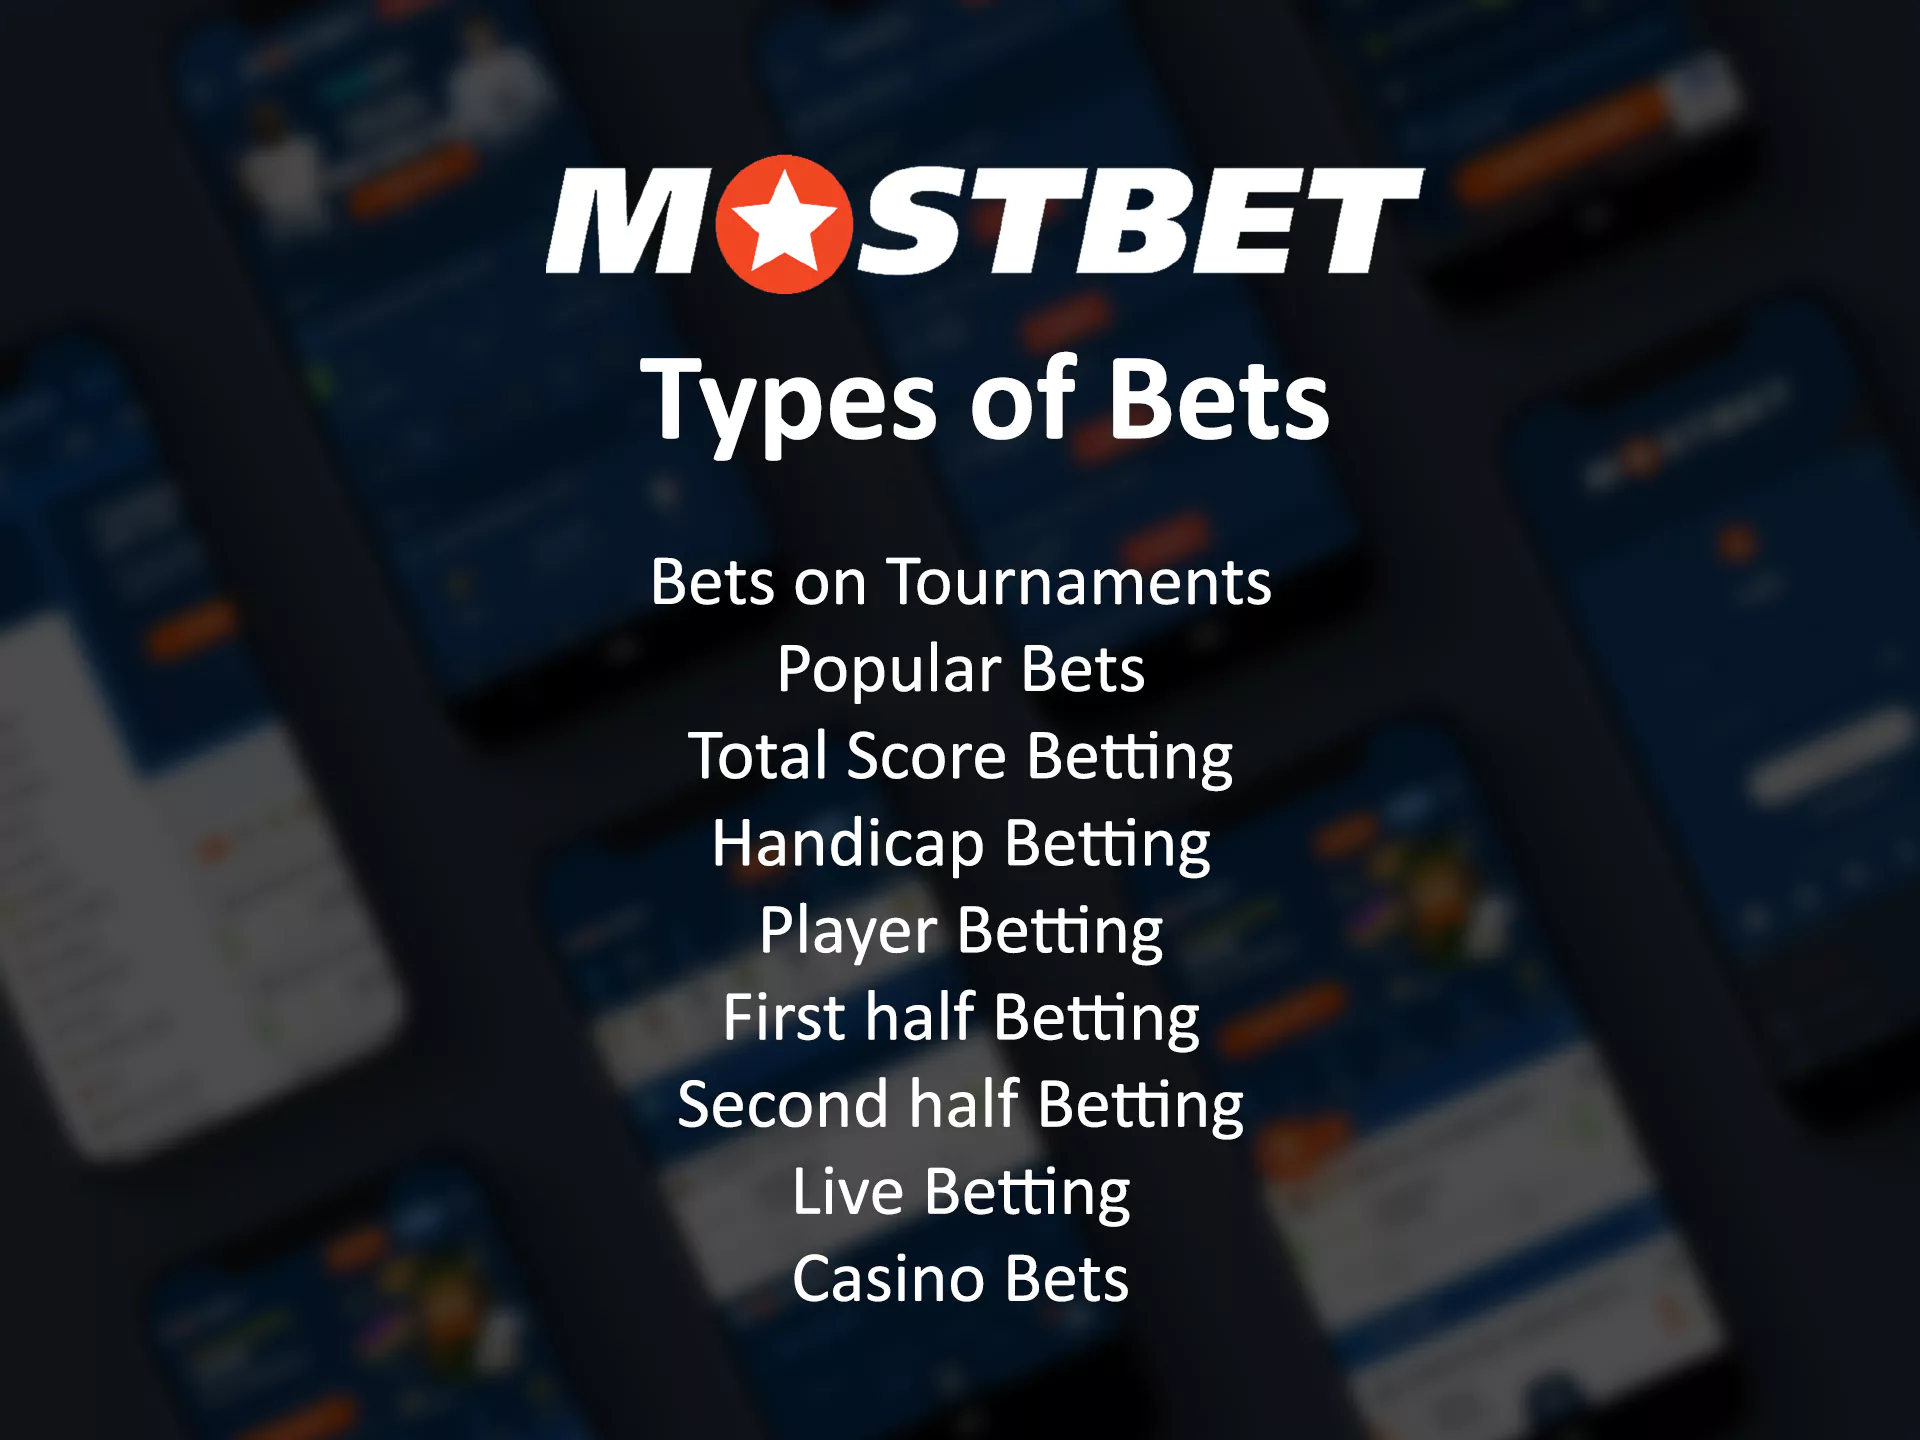 There are plenty of types of bets that users can choose from on Mostbet.